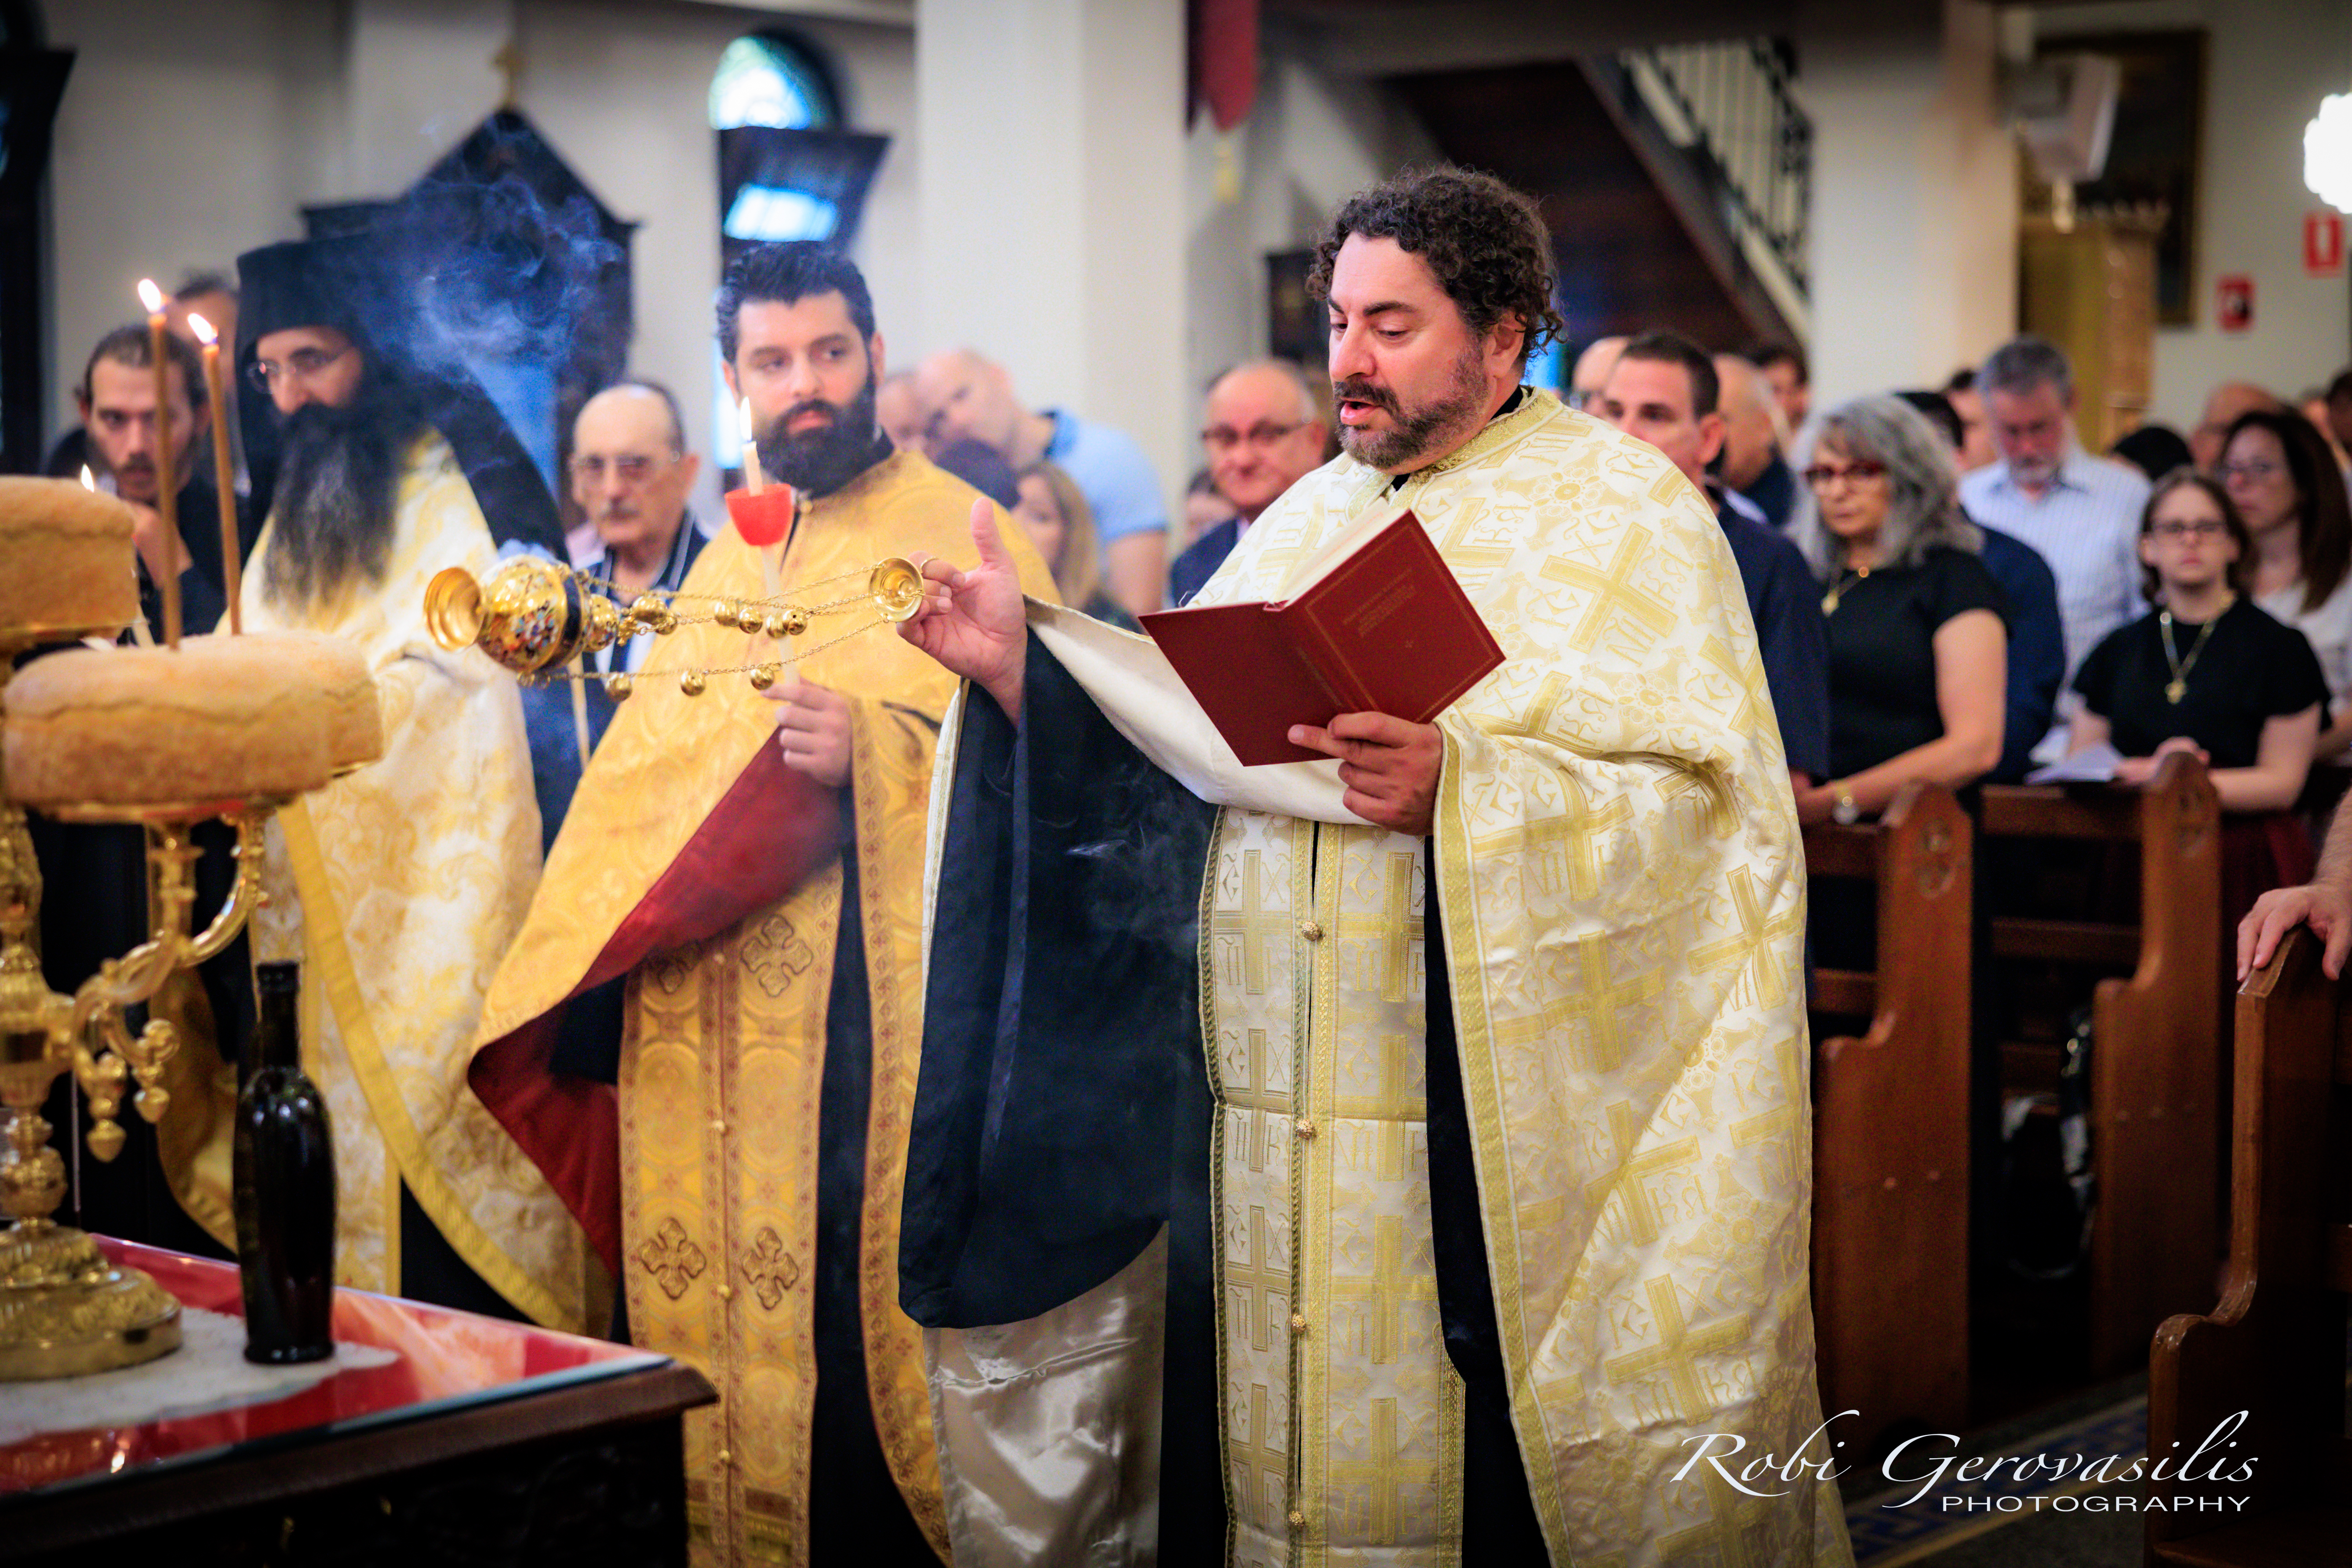 Perth: Great Vespers for the Feast of the Nativity of Christ